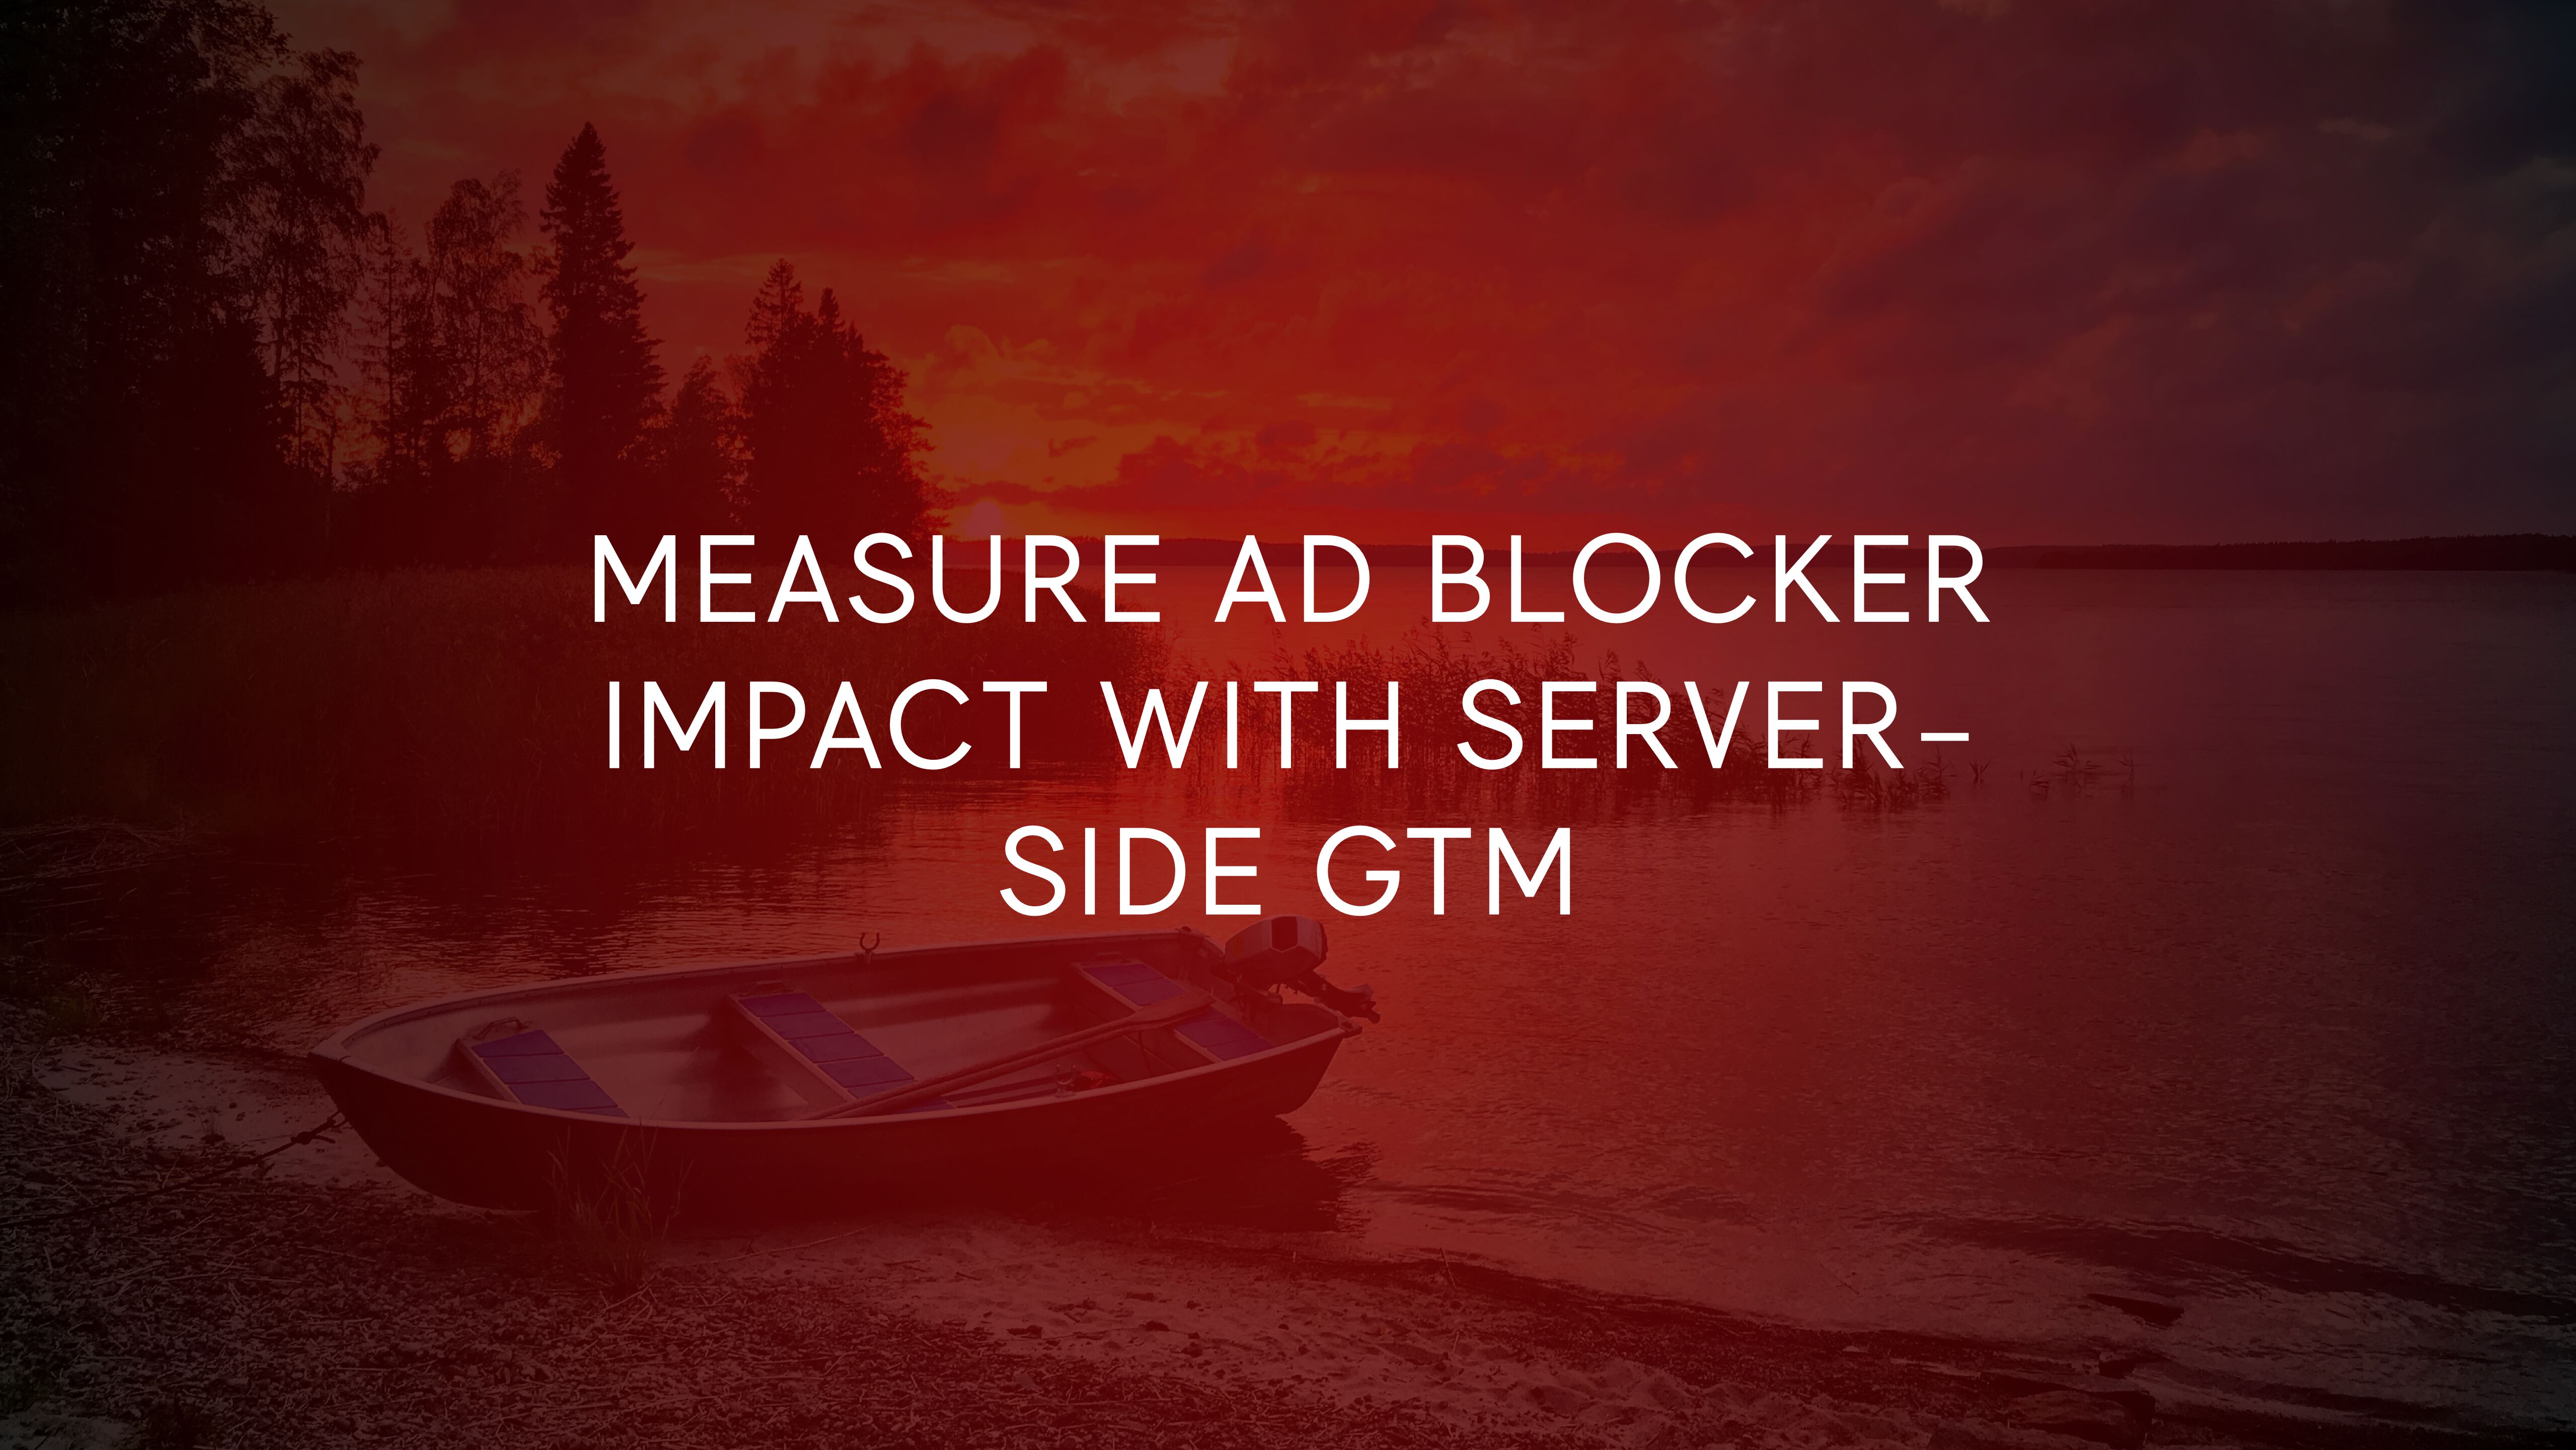 Measure Ad Blocker Impact With Server-side GTM